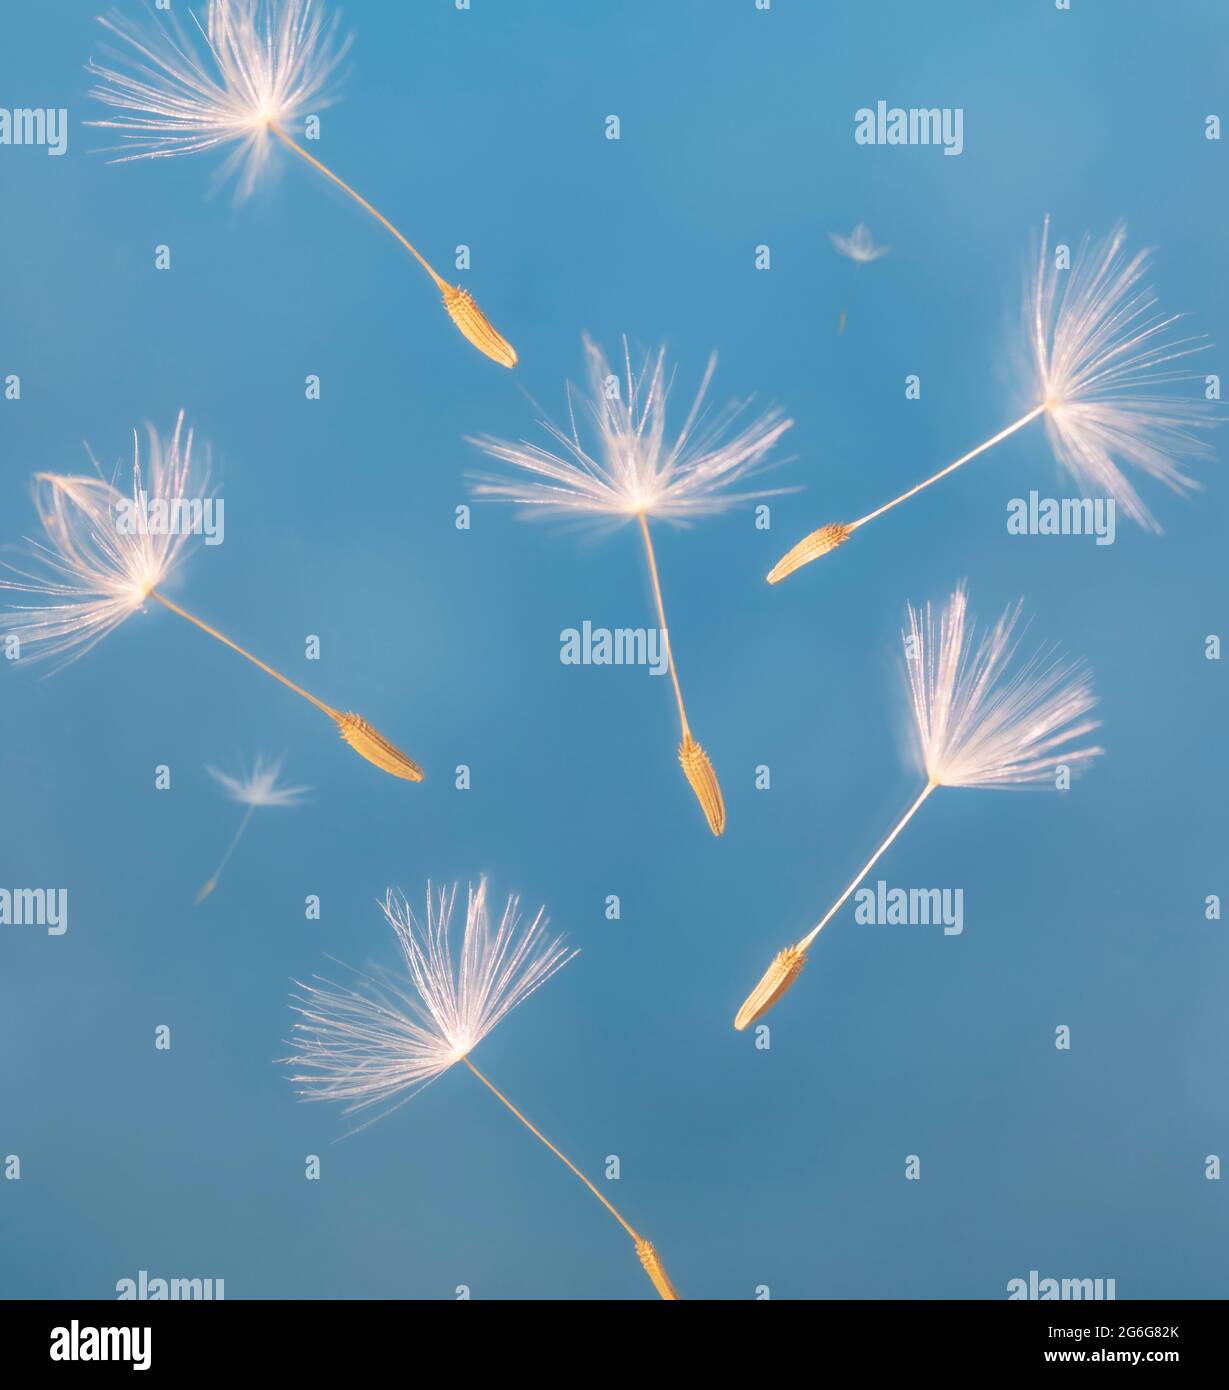 Dandelion seeds in the wind. Stock Photo